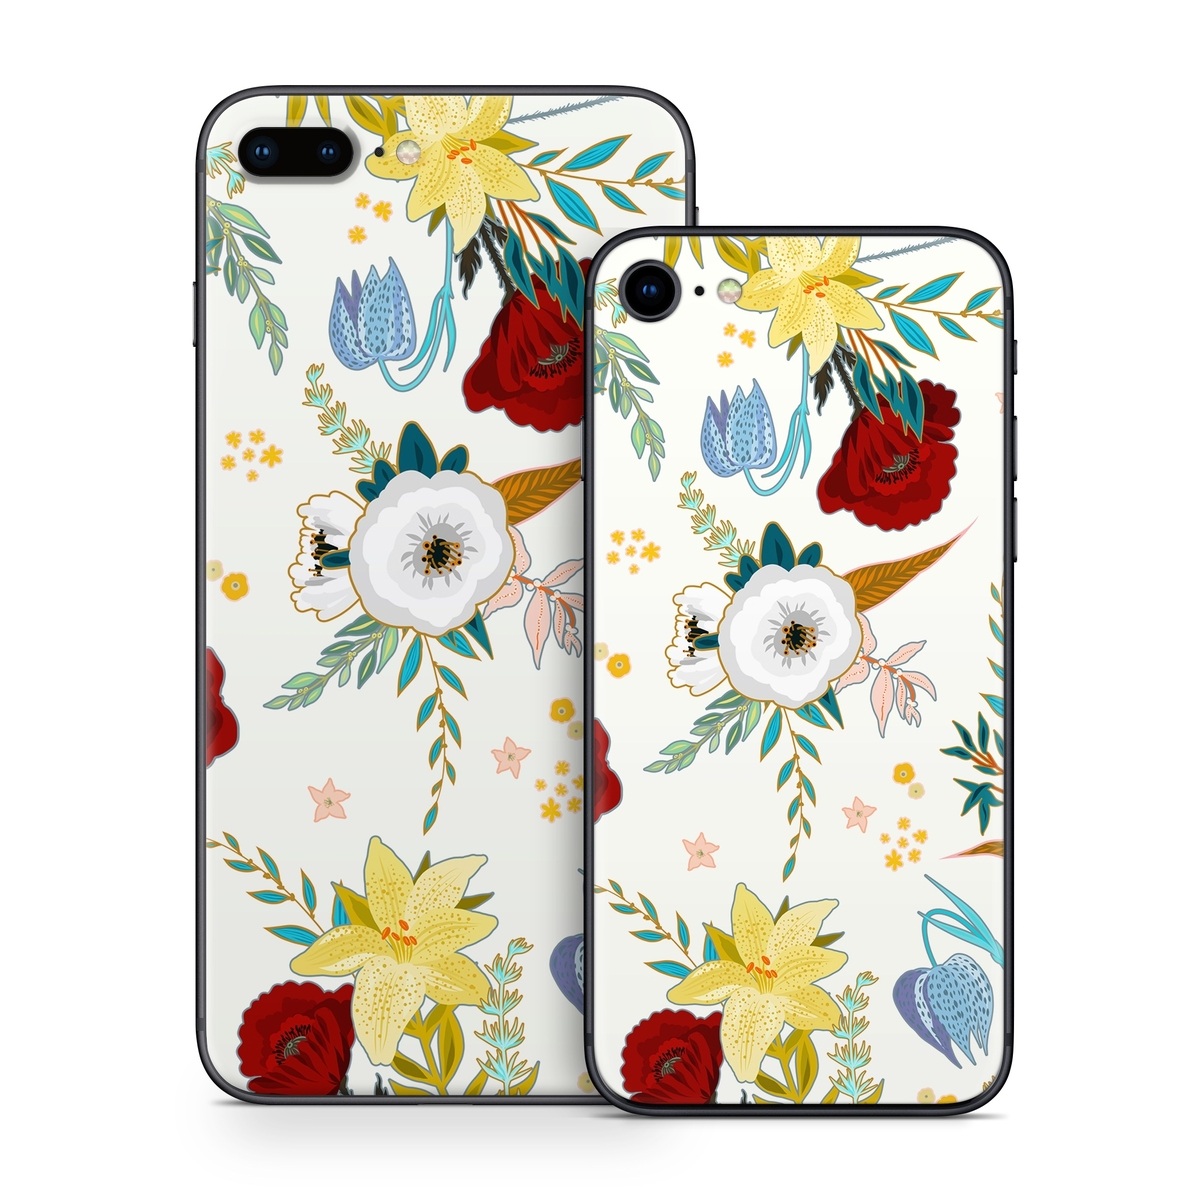 iPhone 8 Skin design of Floral design, Pattern, Wrapping paper, Botany, Design, Flower, Wallpaper, Plant, Clip art, Pedicel, with white, blue, red, yellow, pink, orange colors